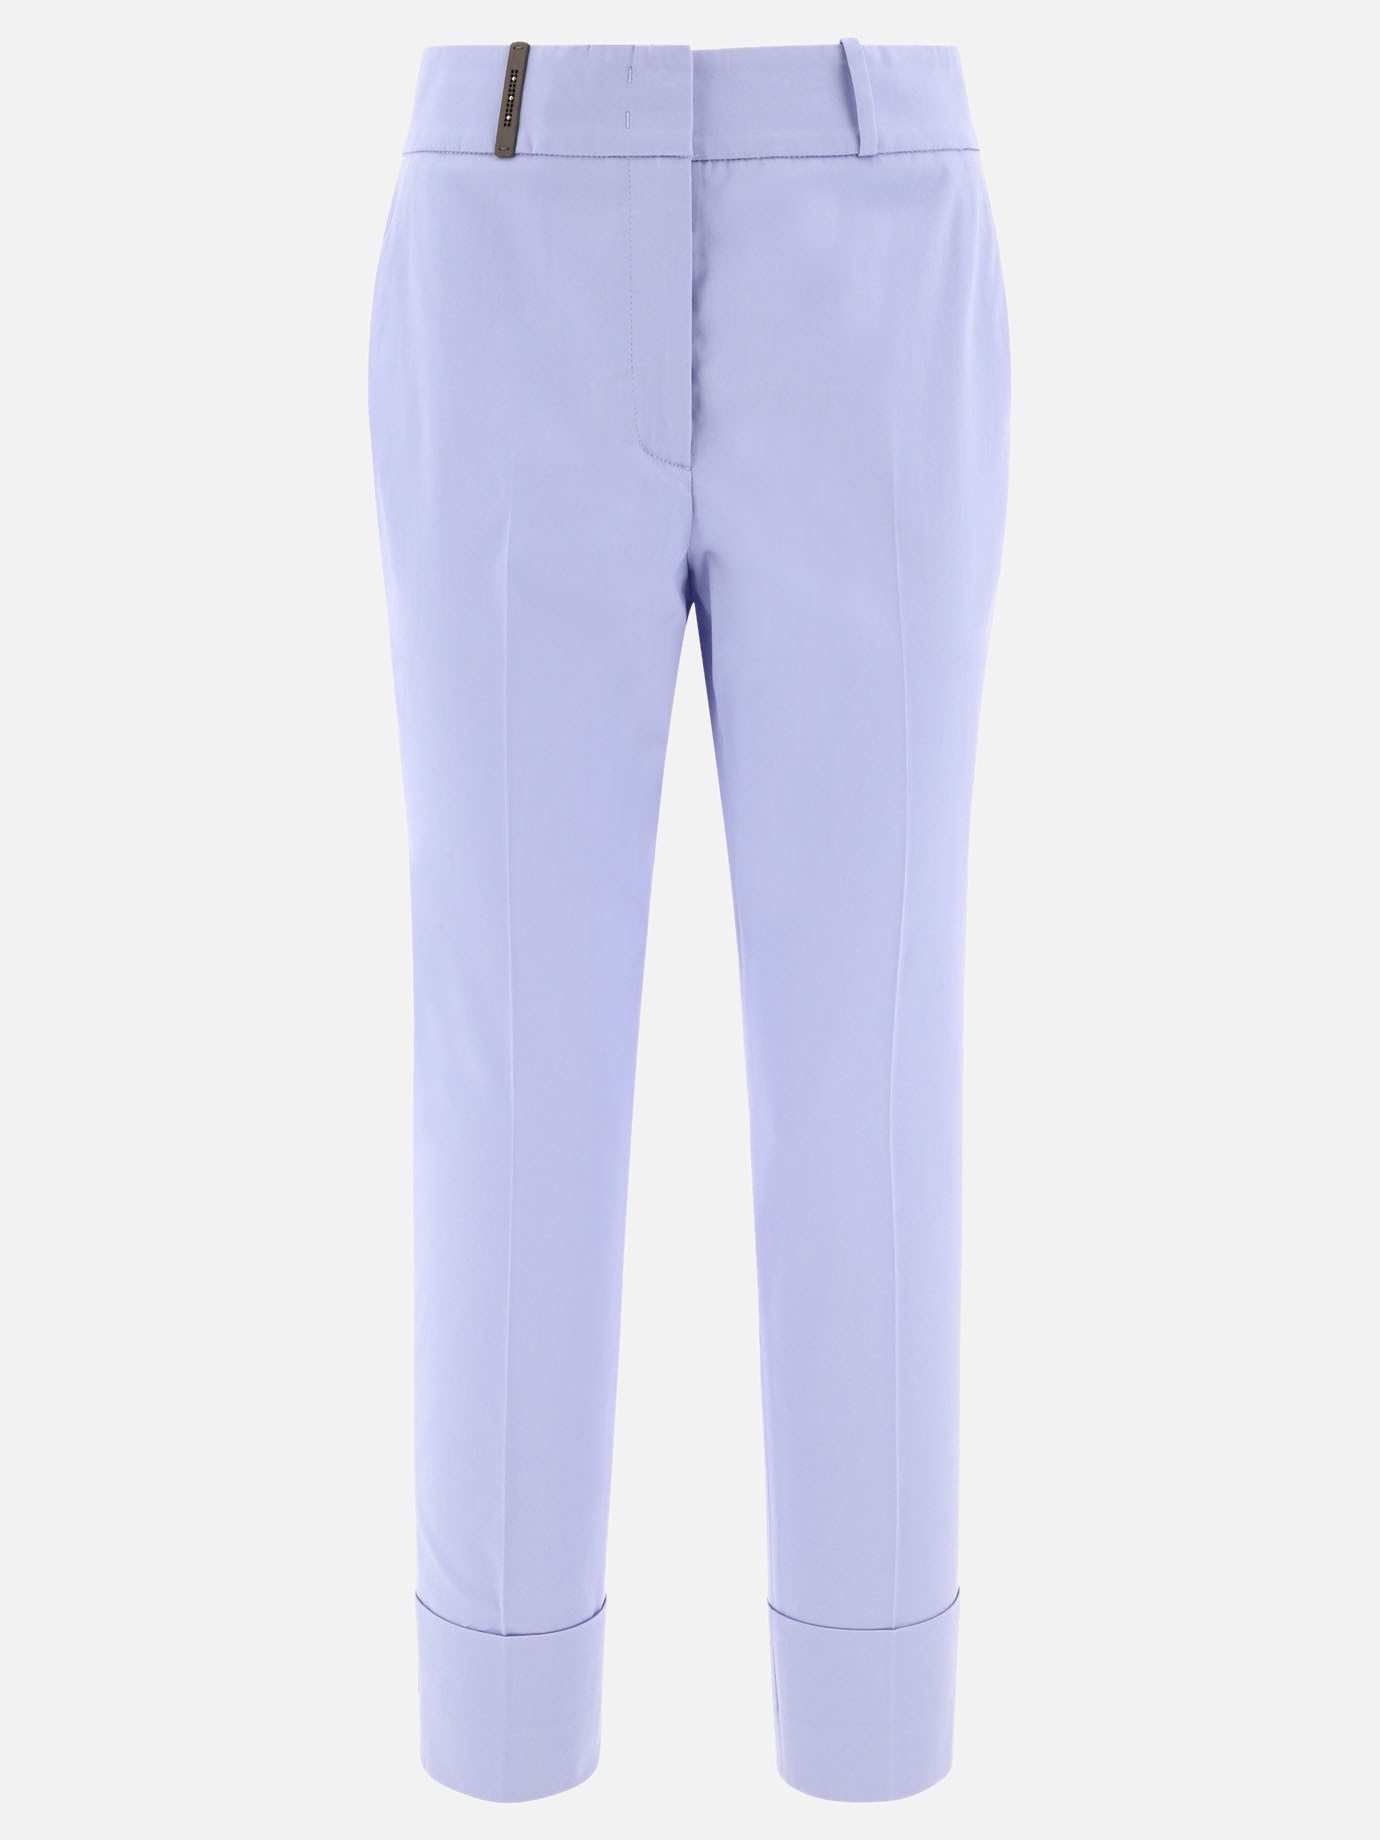 Trousers with high turn-up hem